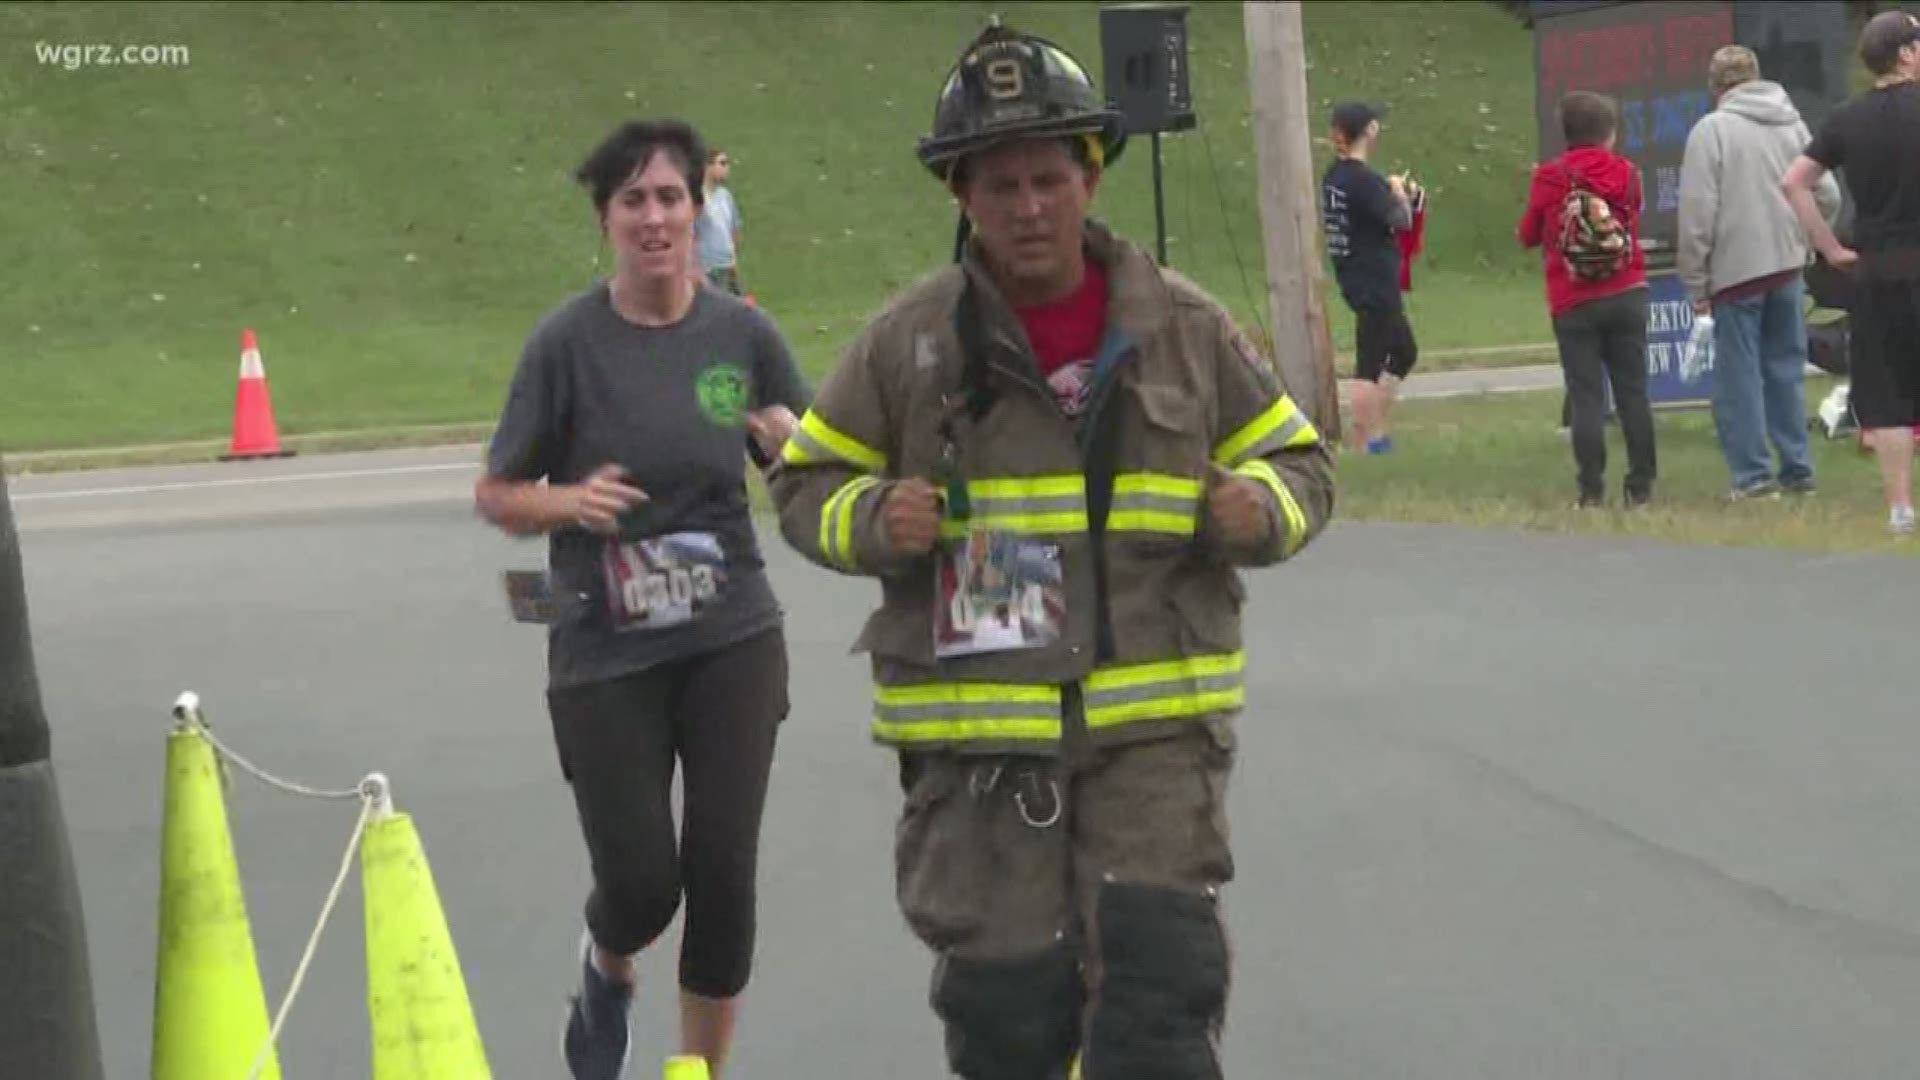 Annual race to remember those first responders who lost their lives on 9/11.